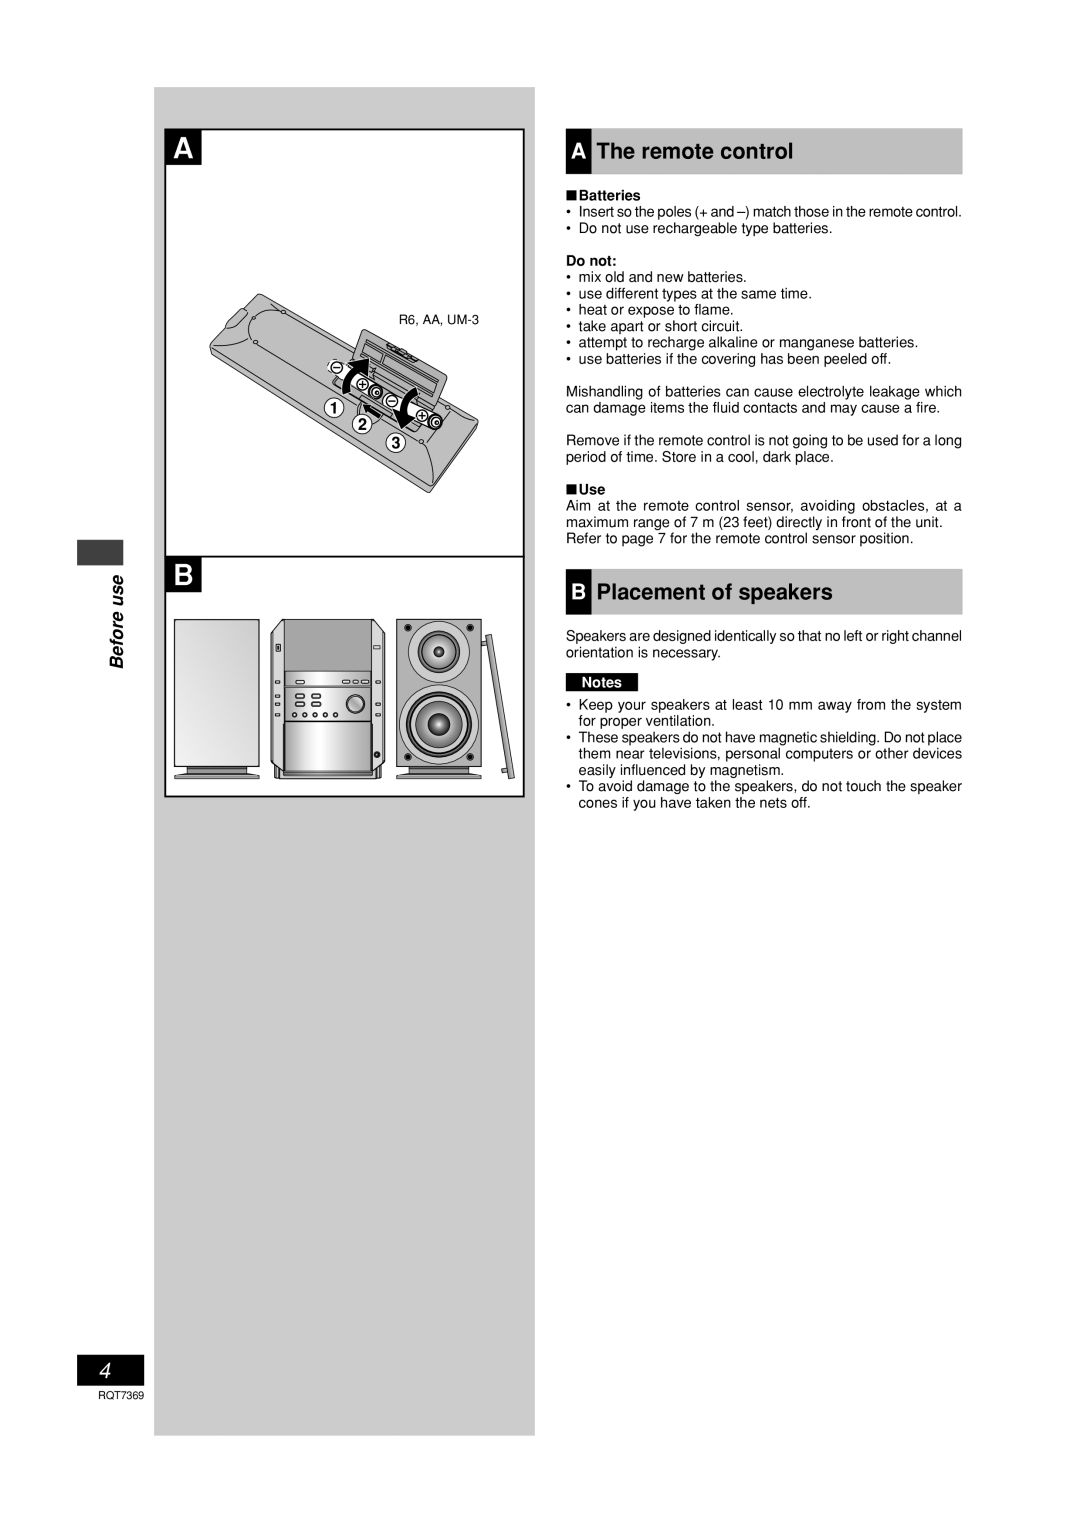 Panasonic SCPM19 operating instructions AThe remote control, BPlacement of speakers, Beforeuse 